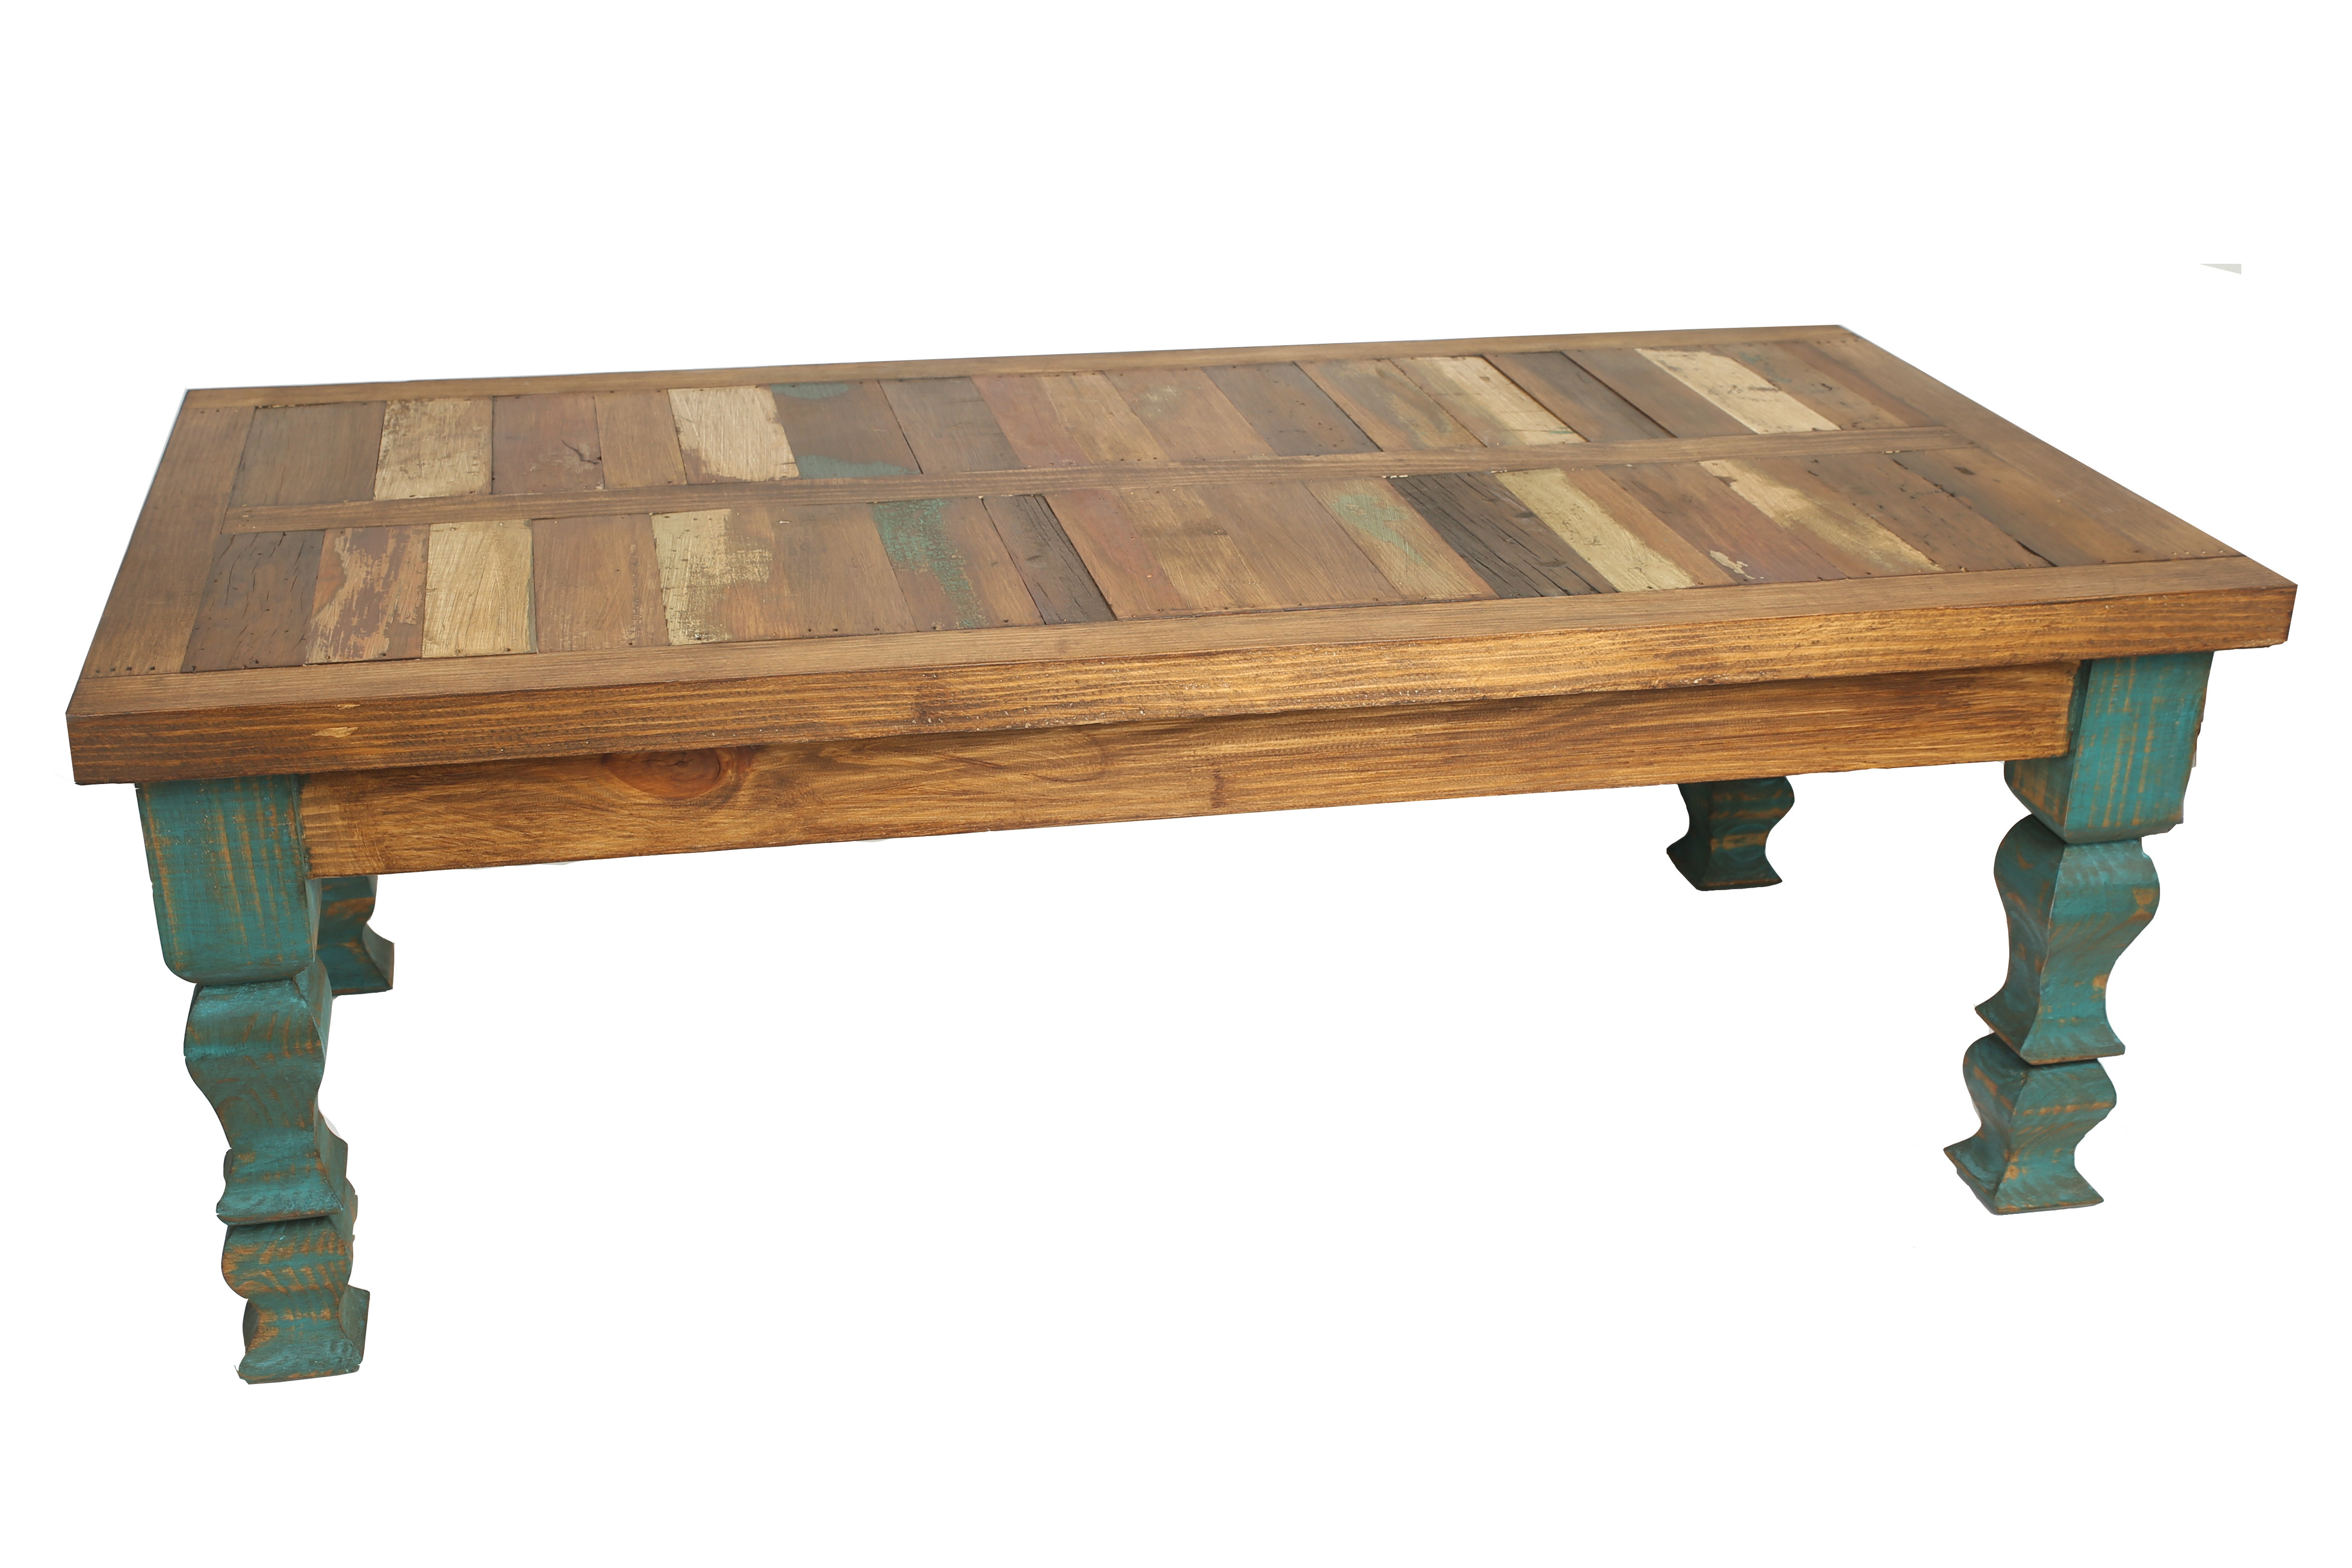 Crenata Reclaimed Old Door Coffee Table throughout dimensions 4742 X 3162